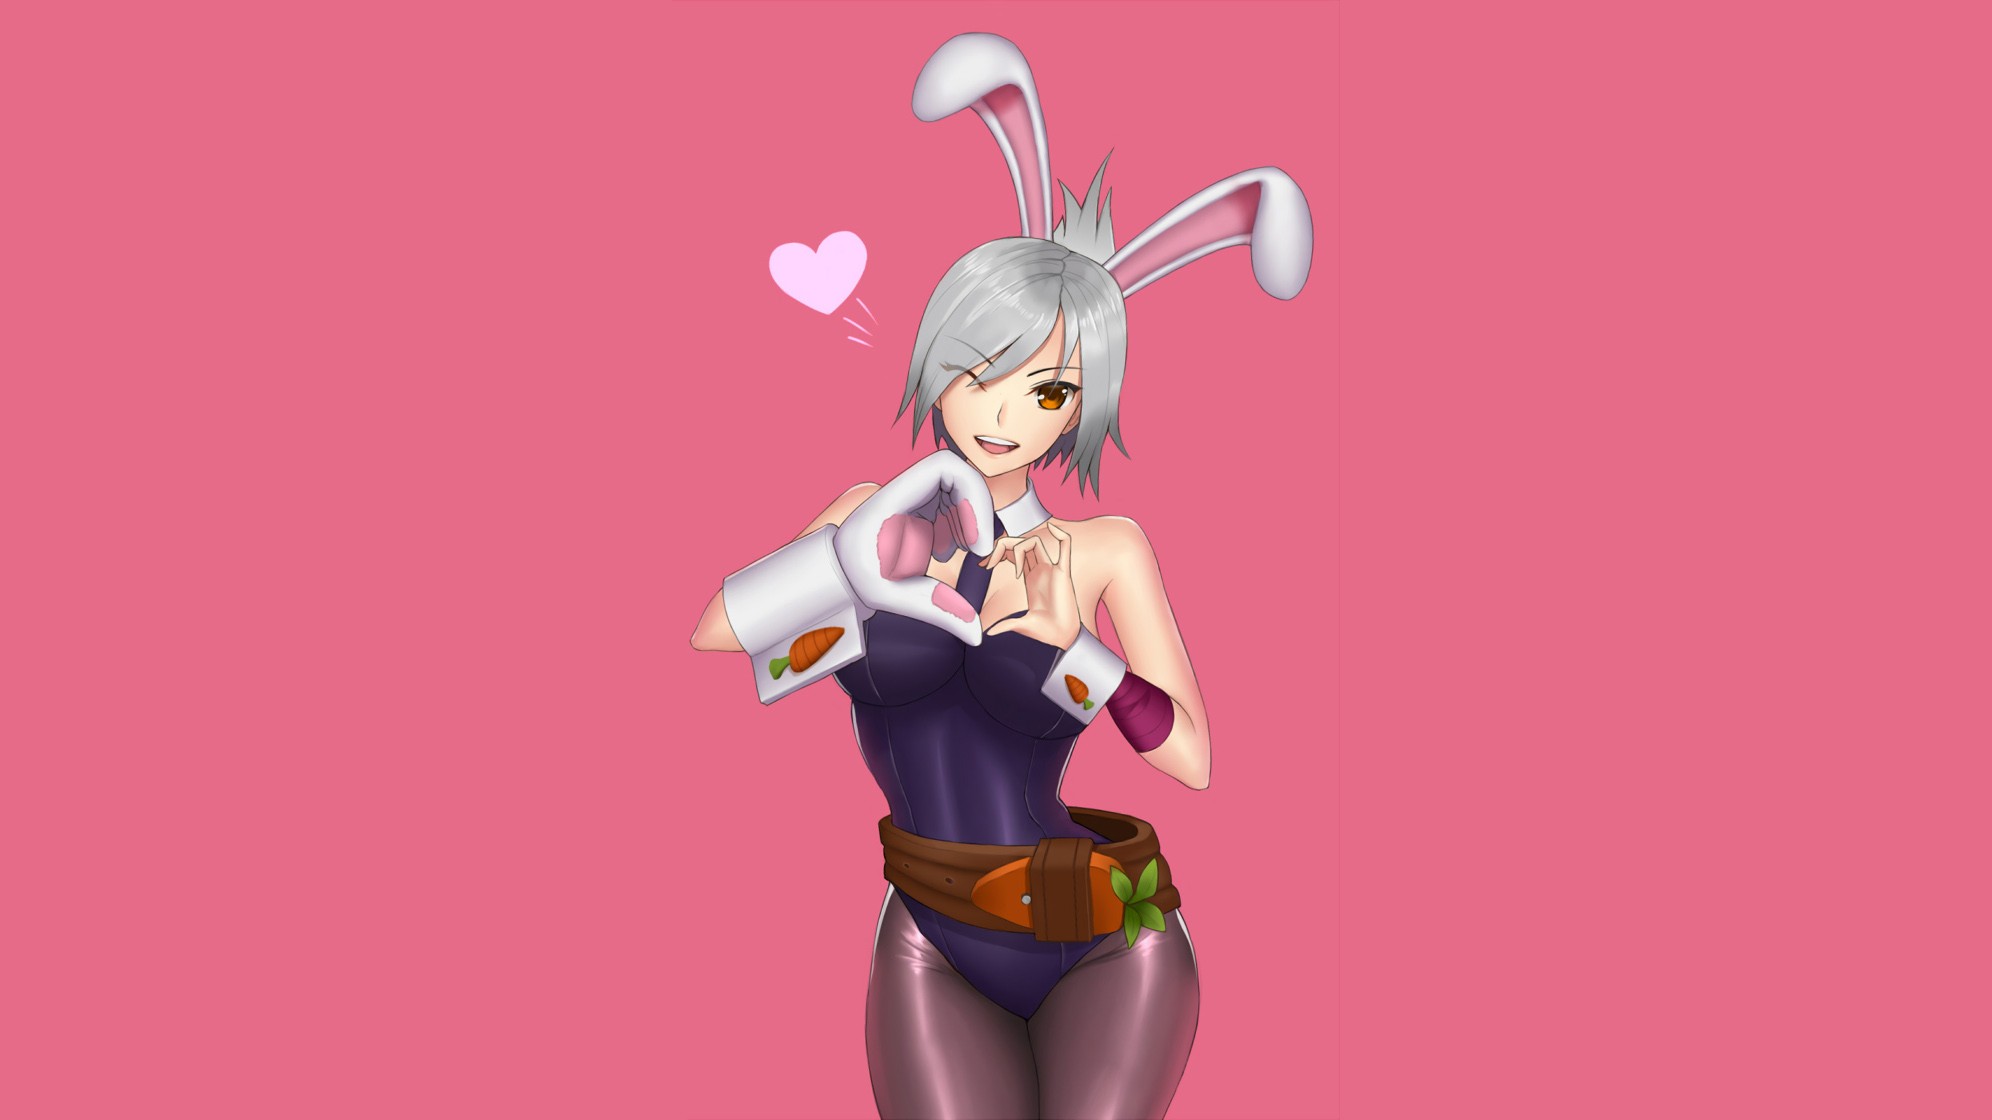 General 1992x1120 League of Legends Riven (League of Legends) PC gaming anime anime girls video game art video game girls erotic art  bunny ears bodysuit standing simple background pink background one eye closed